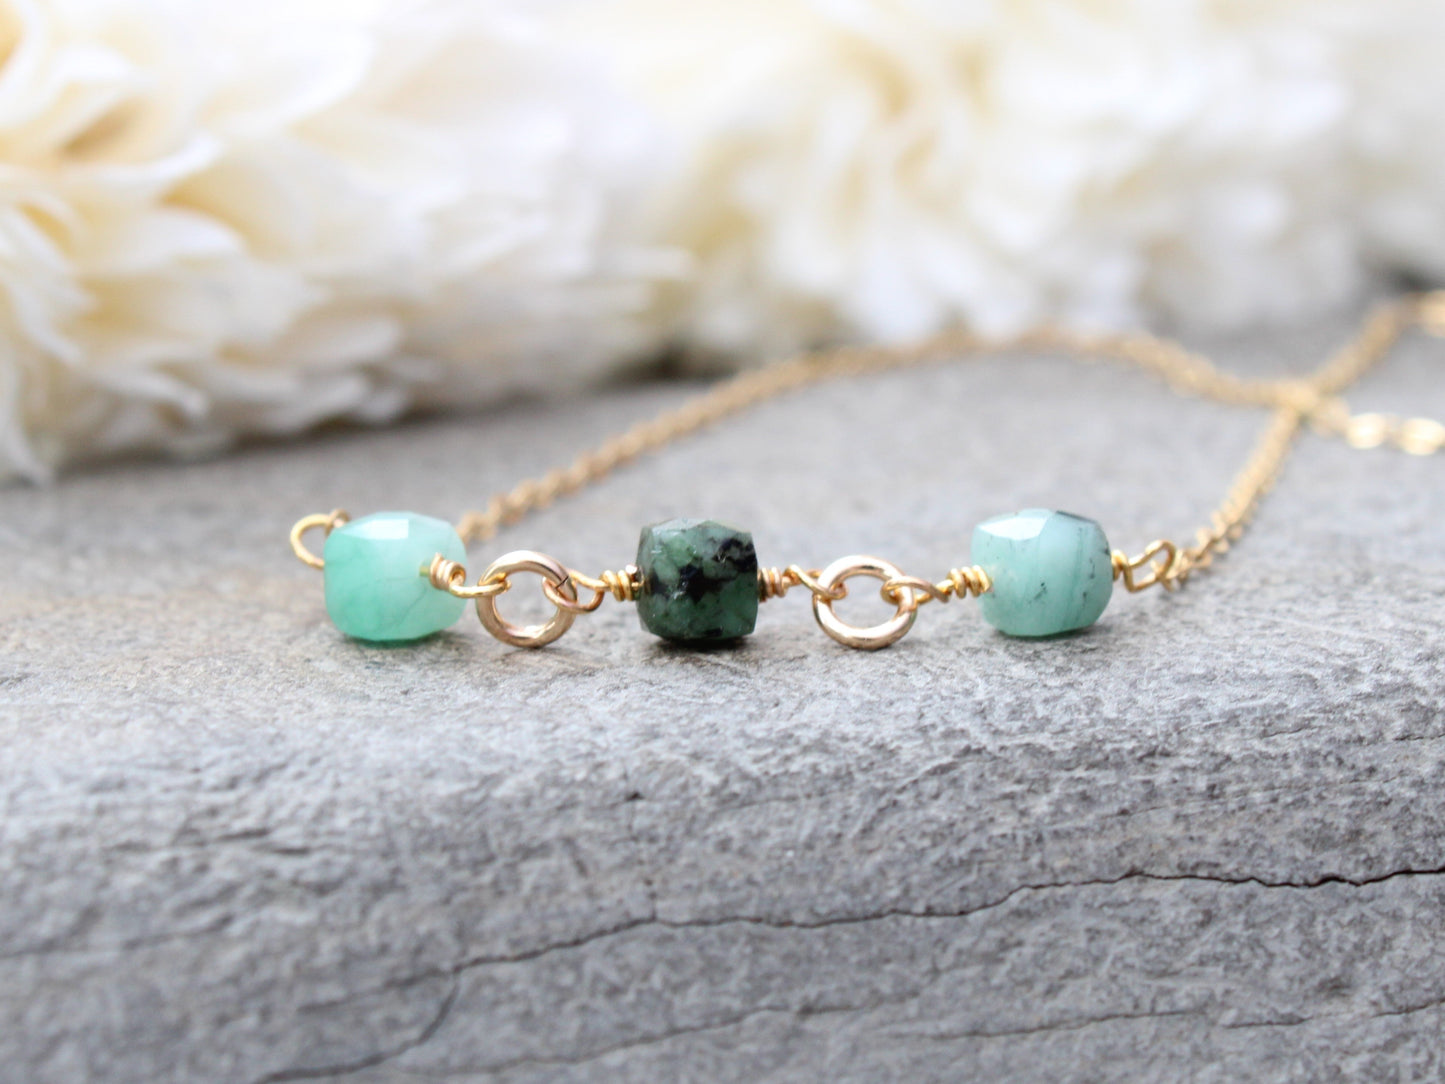 Emerald gemstone necklace in silver or gold.